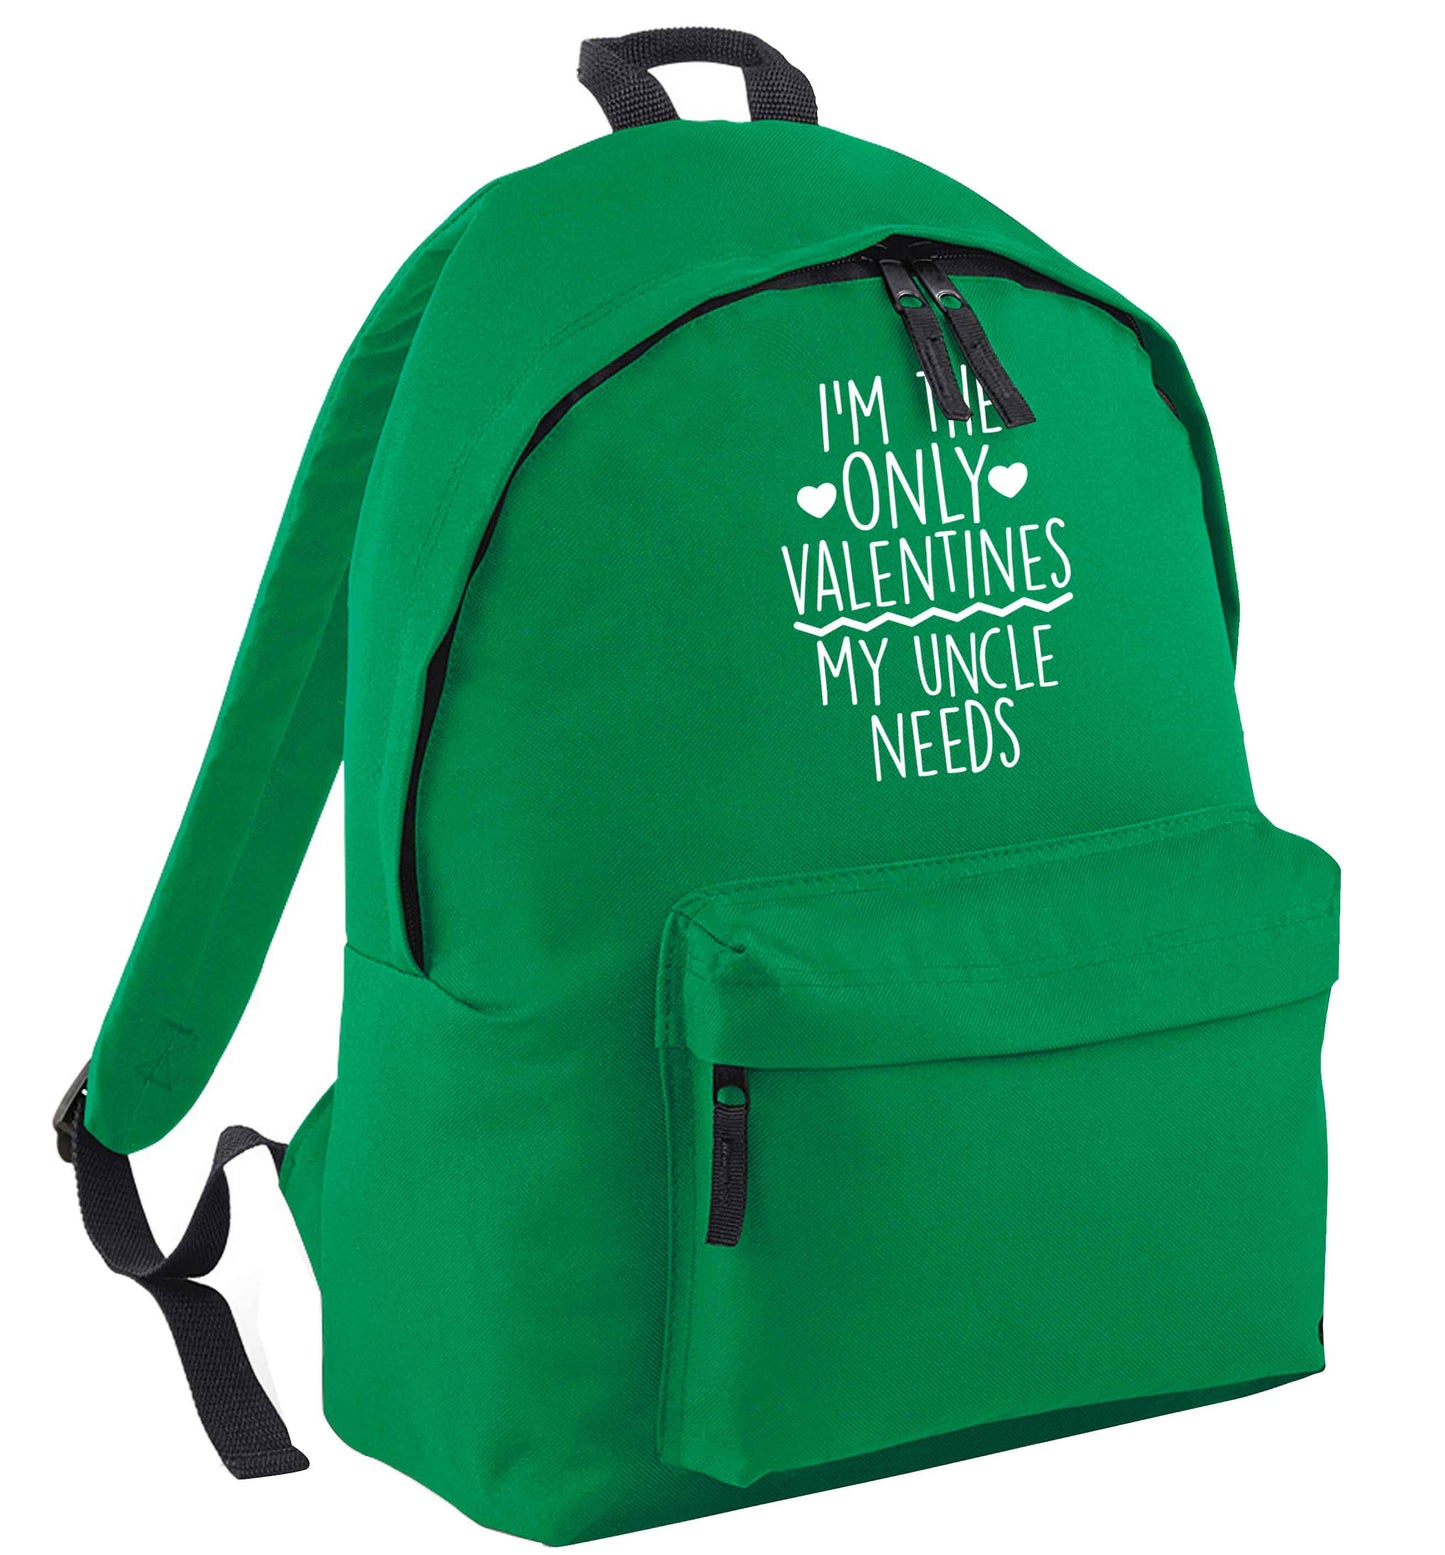 I'm the only valentines my uncle needs green adults backpack